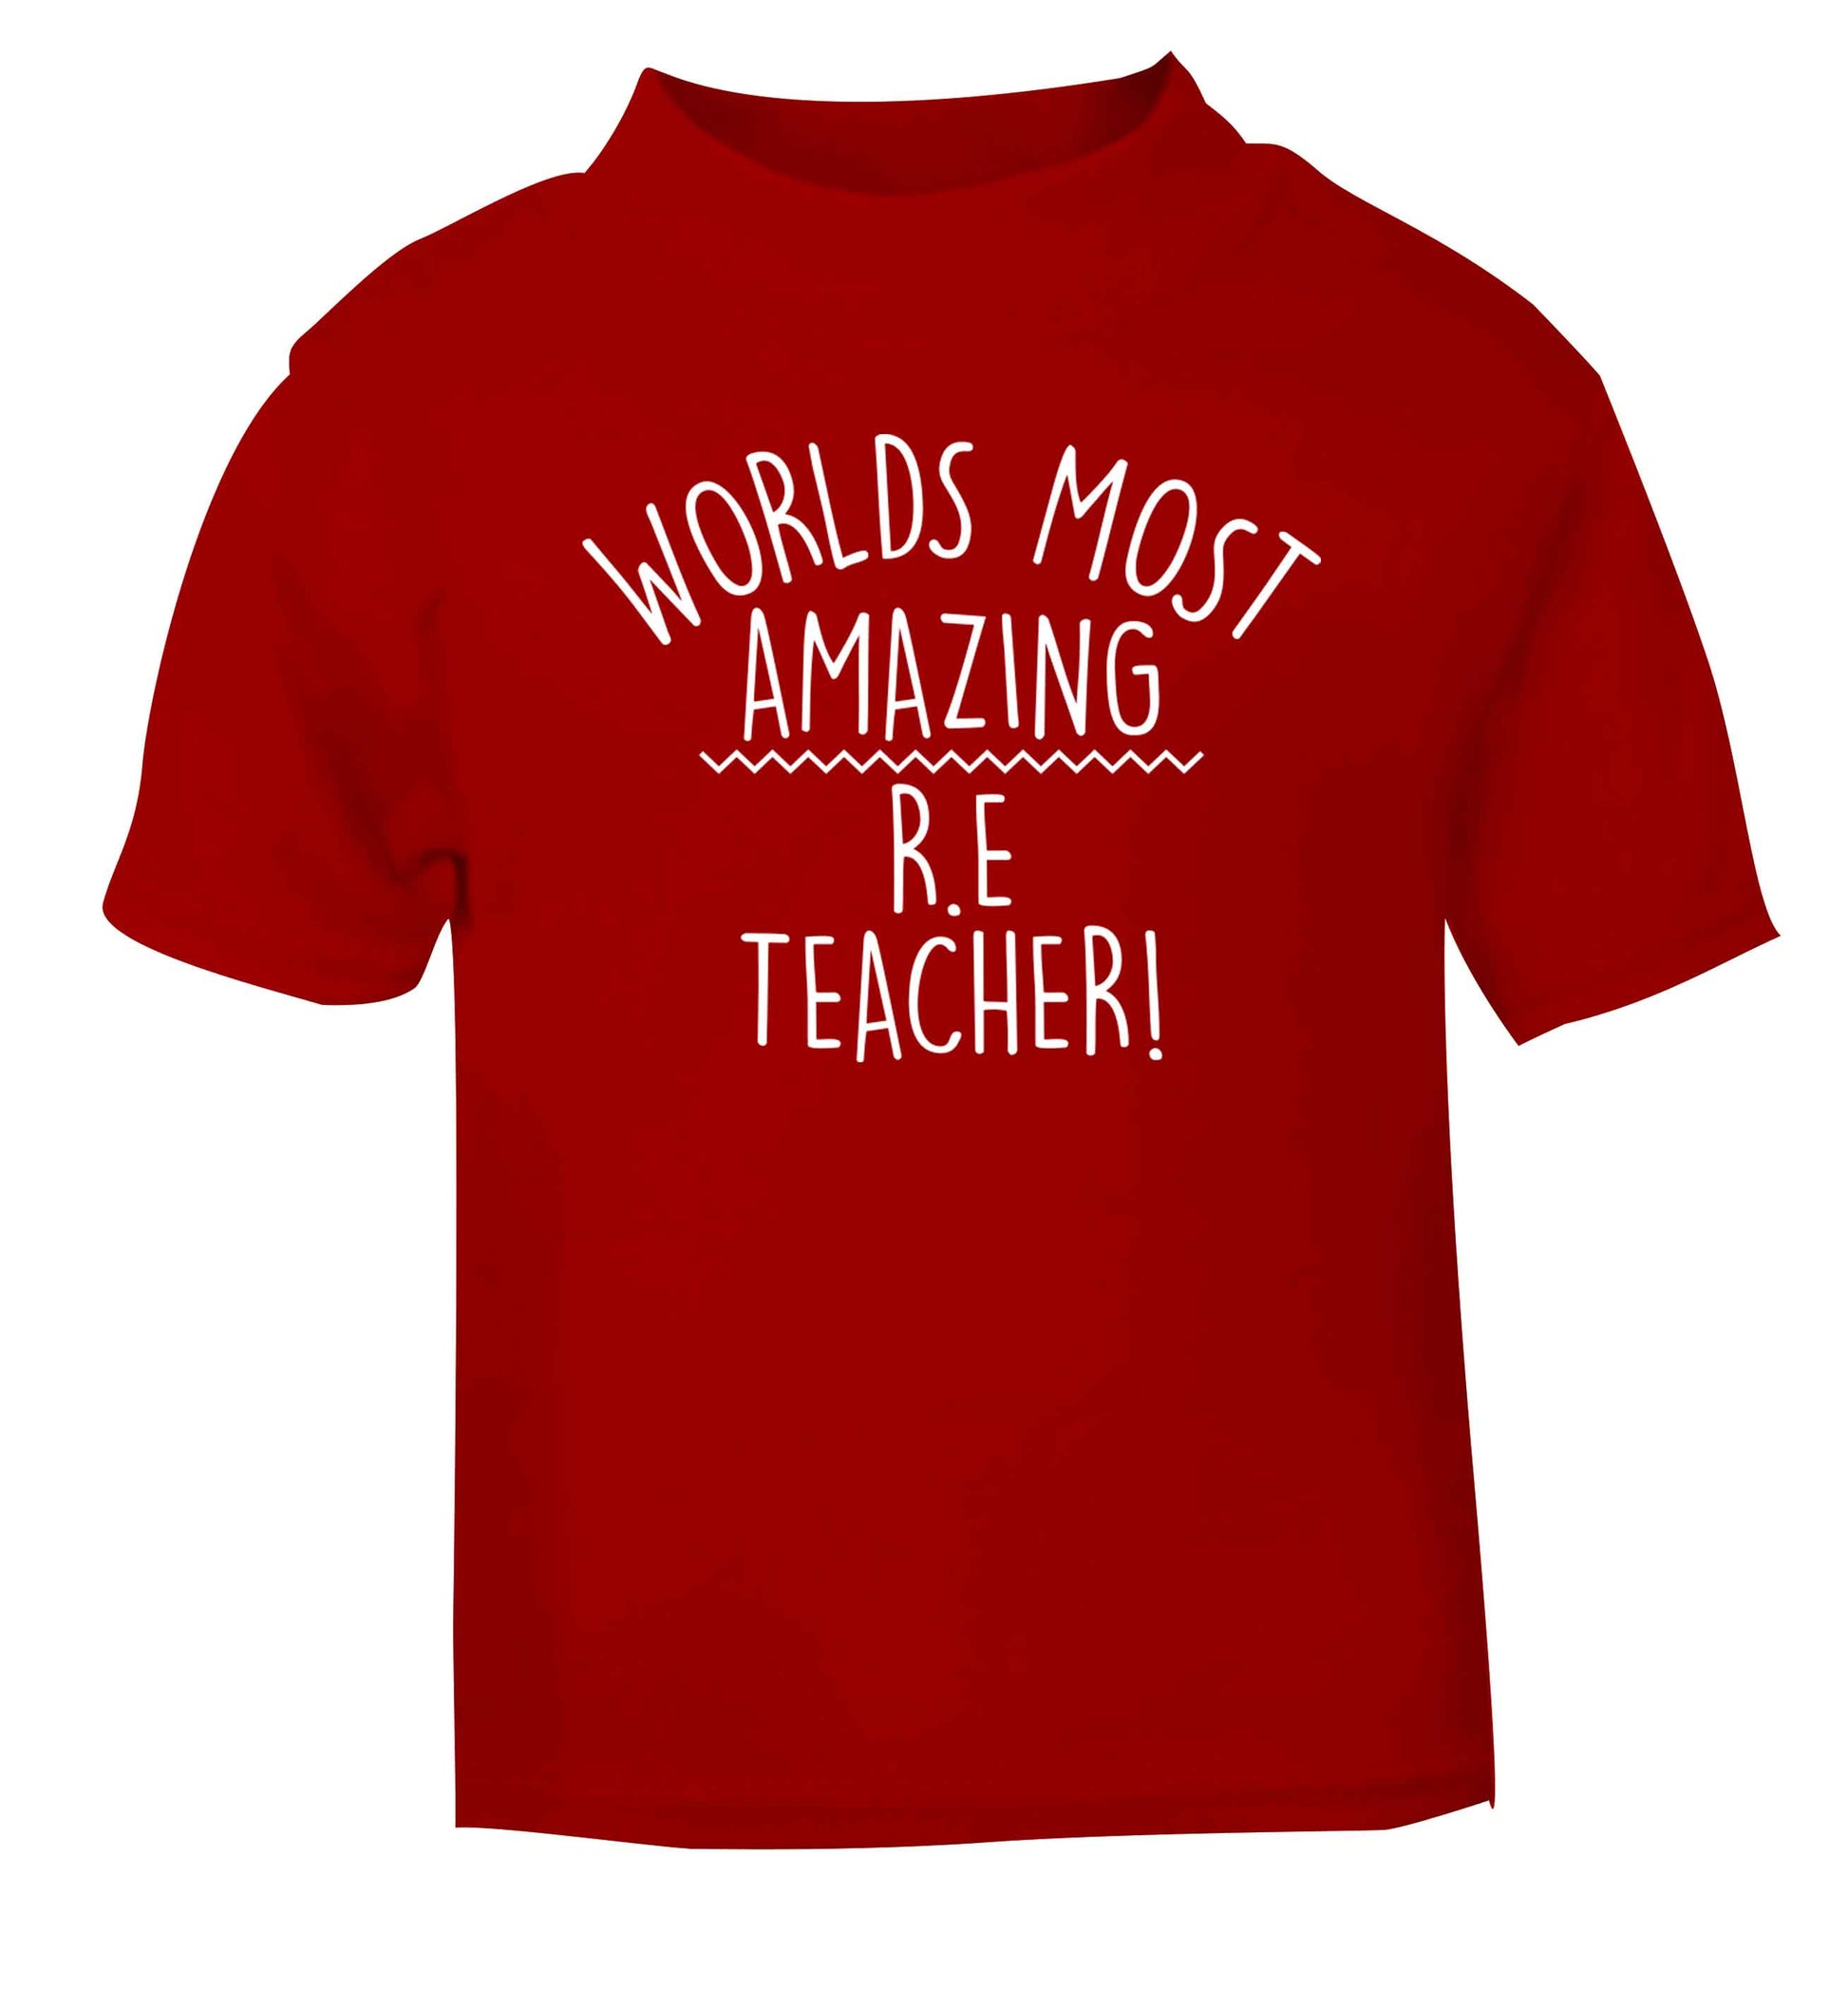 Worlds most amazing R.E teacher red baby toddler Tshirt 2 Years